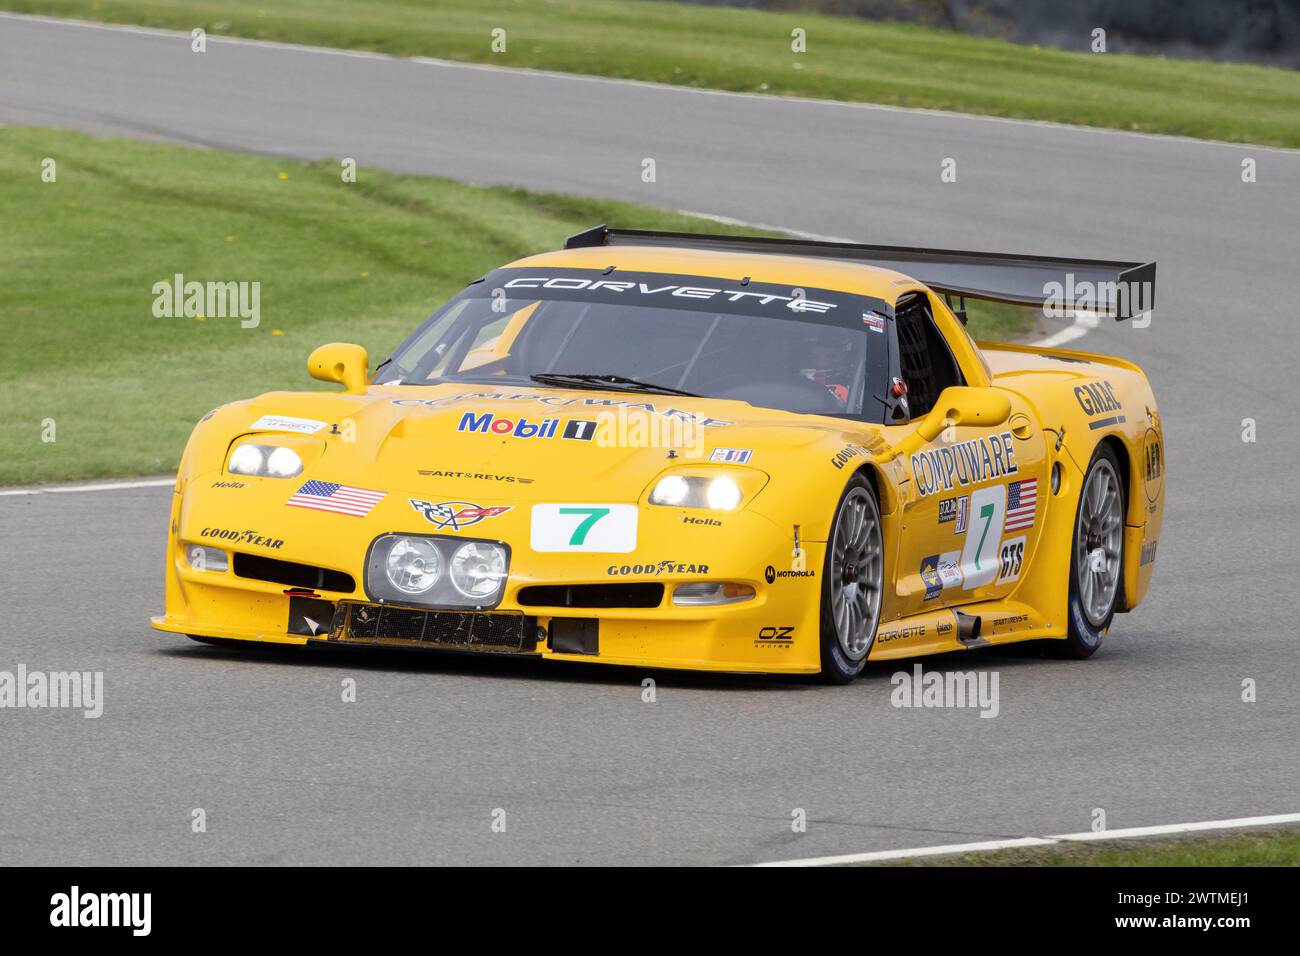 2002 Chevrolet Corvette C5-R GT1 endurance racer at the Goodwood 80th Members Meeting, Sussex, UK. Stock Photo